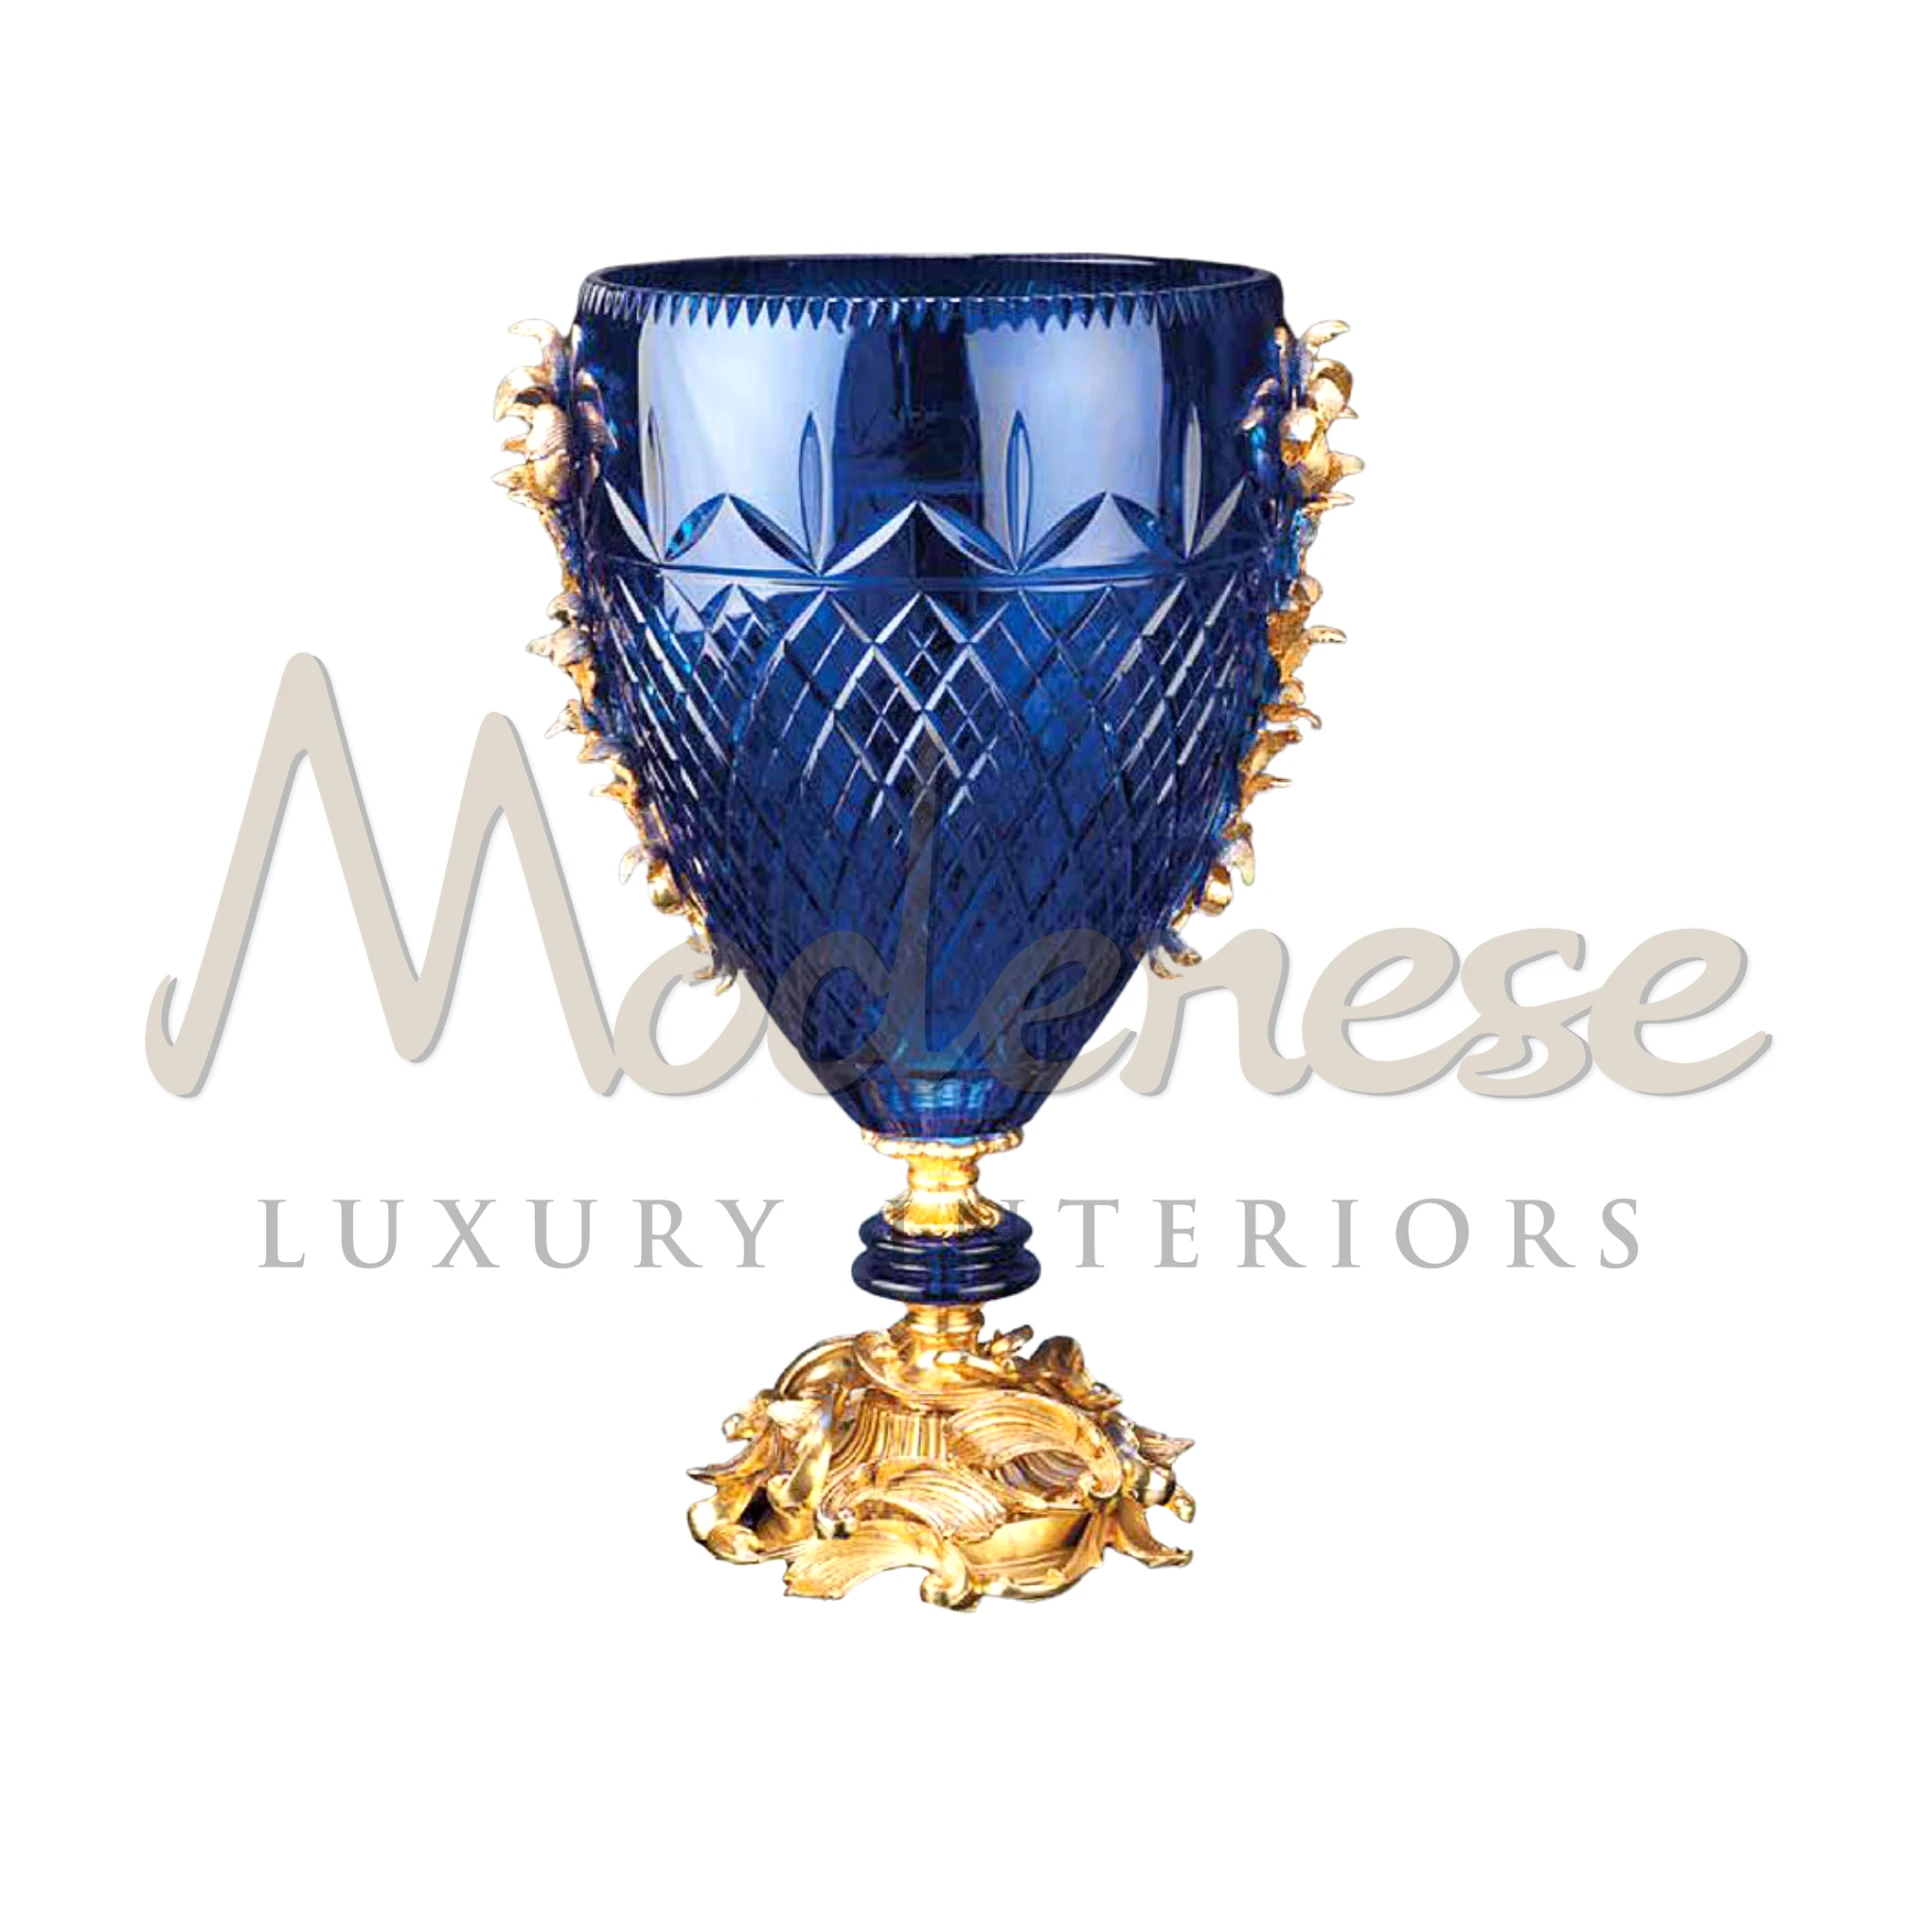 Stylish Blue Glass Vase, a luxurious addition to home decor, perfect for adding elegance and charm as a centerpiece or accent piece.




